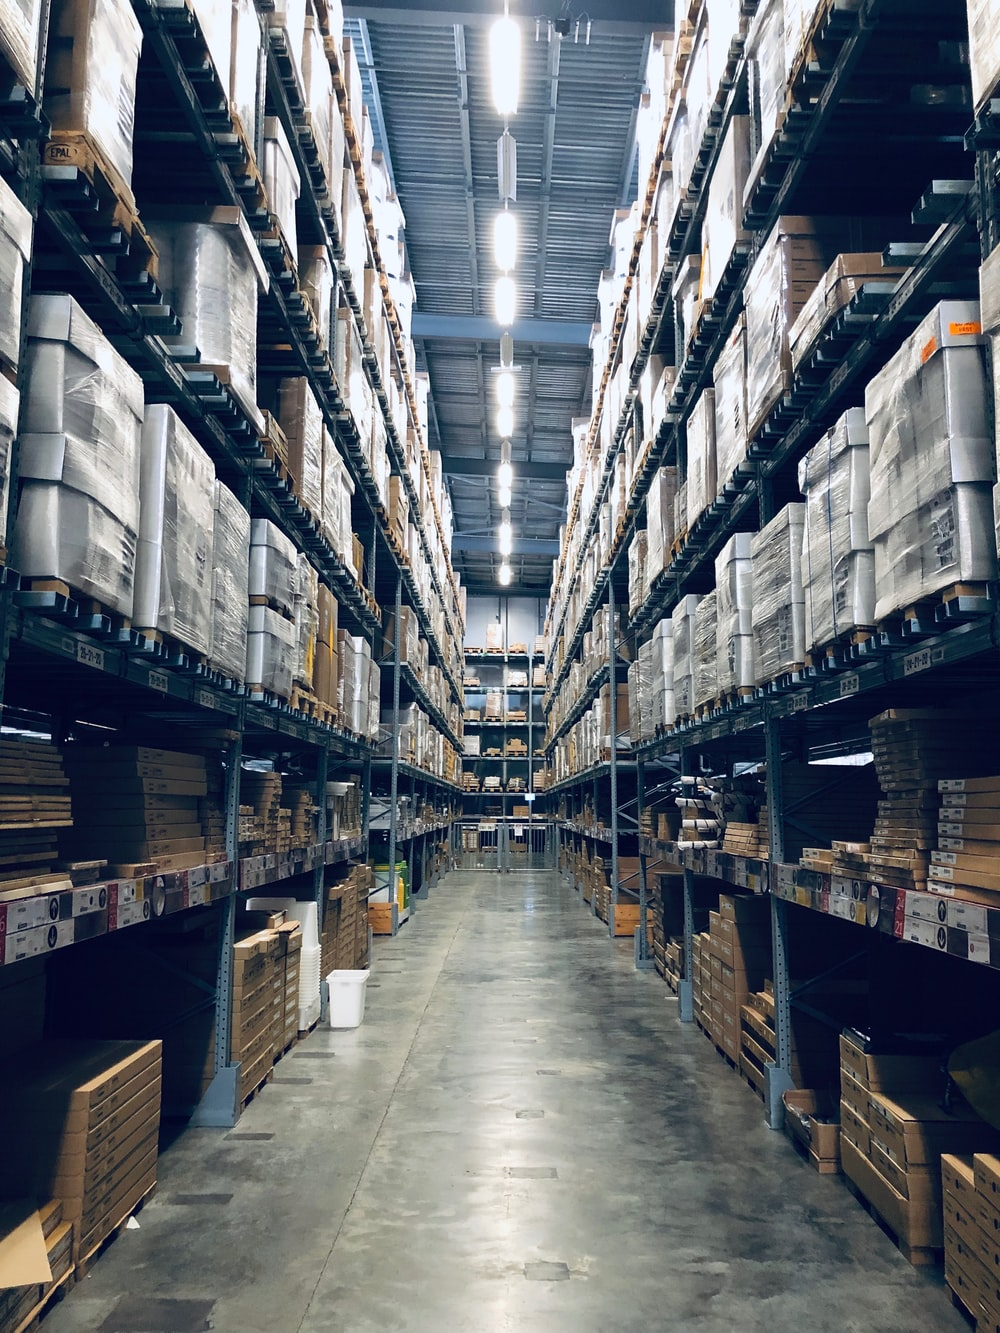  A large warehouse lined with storage boxes  